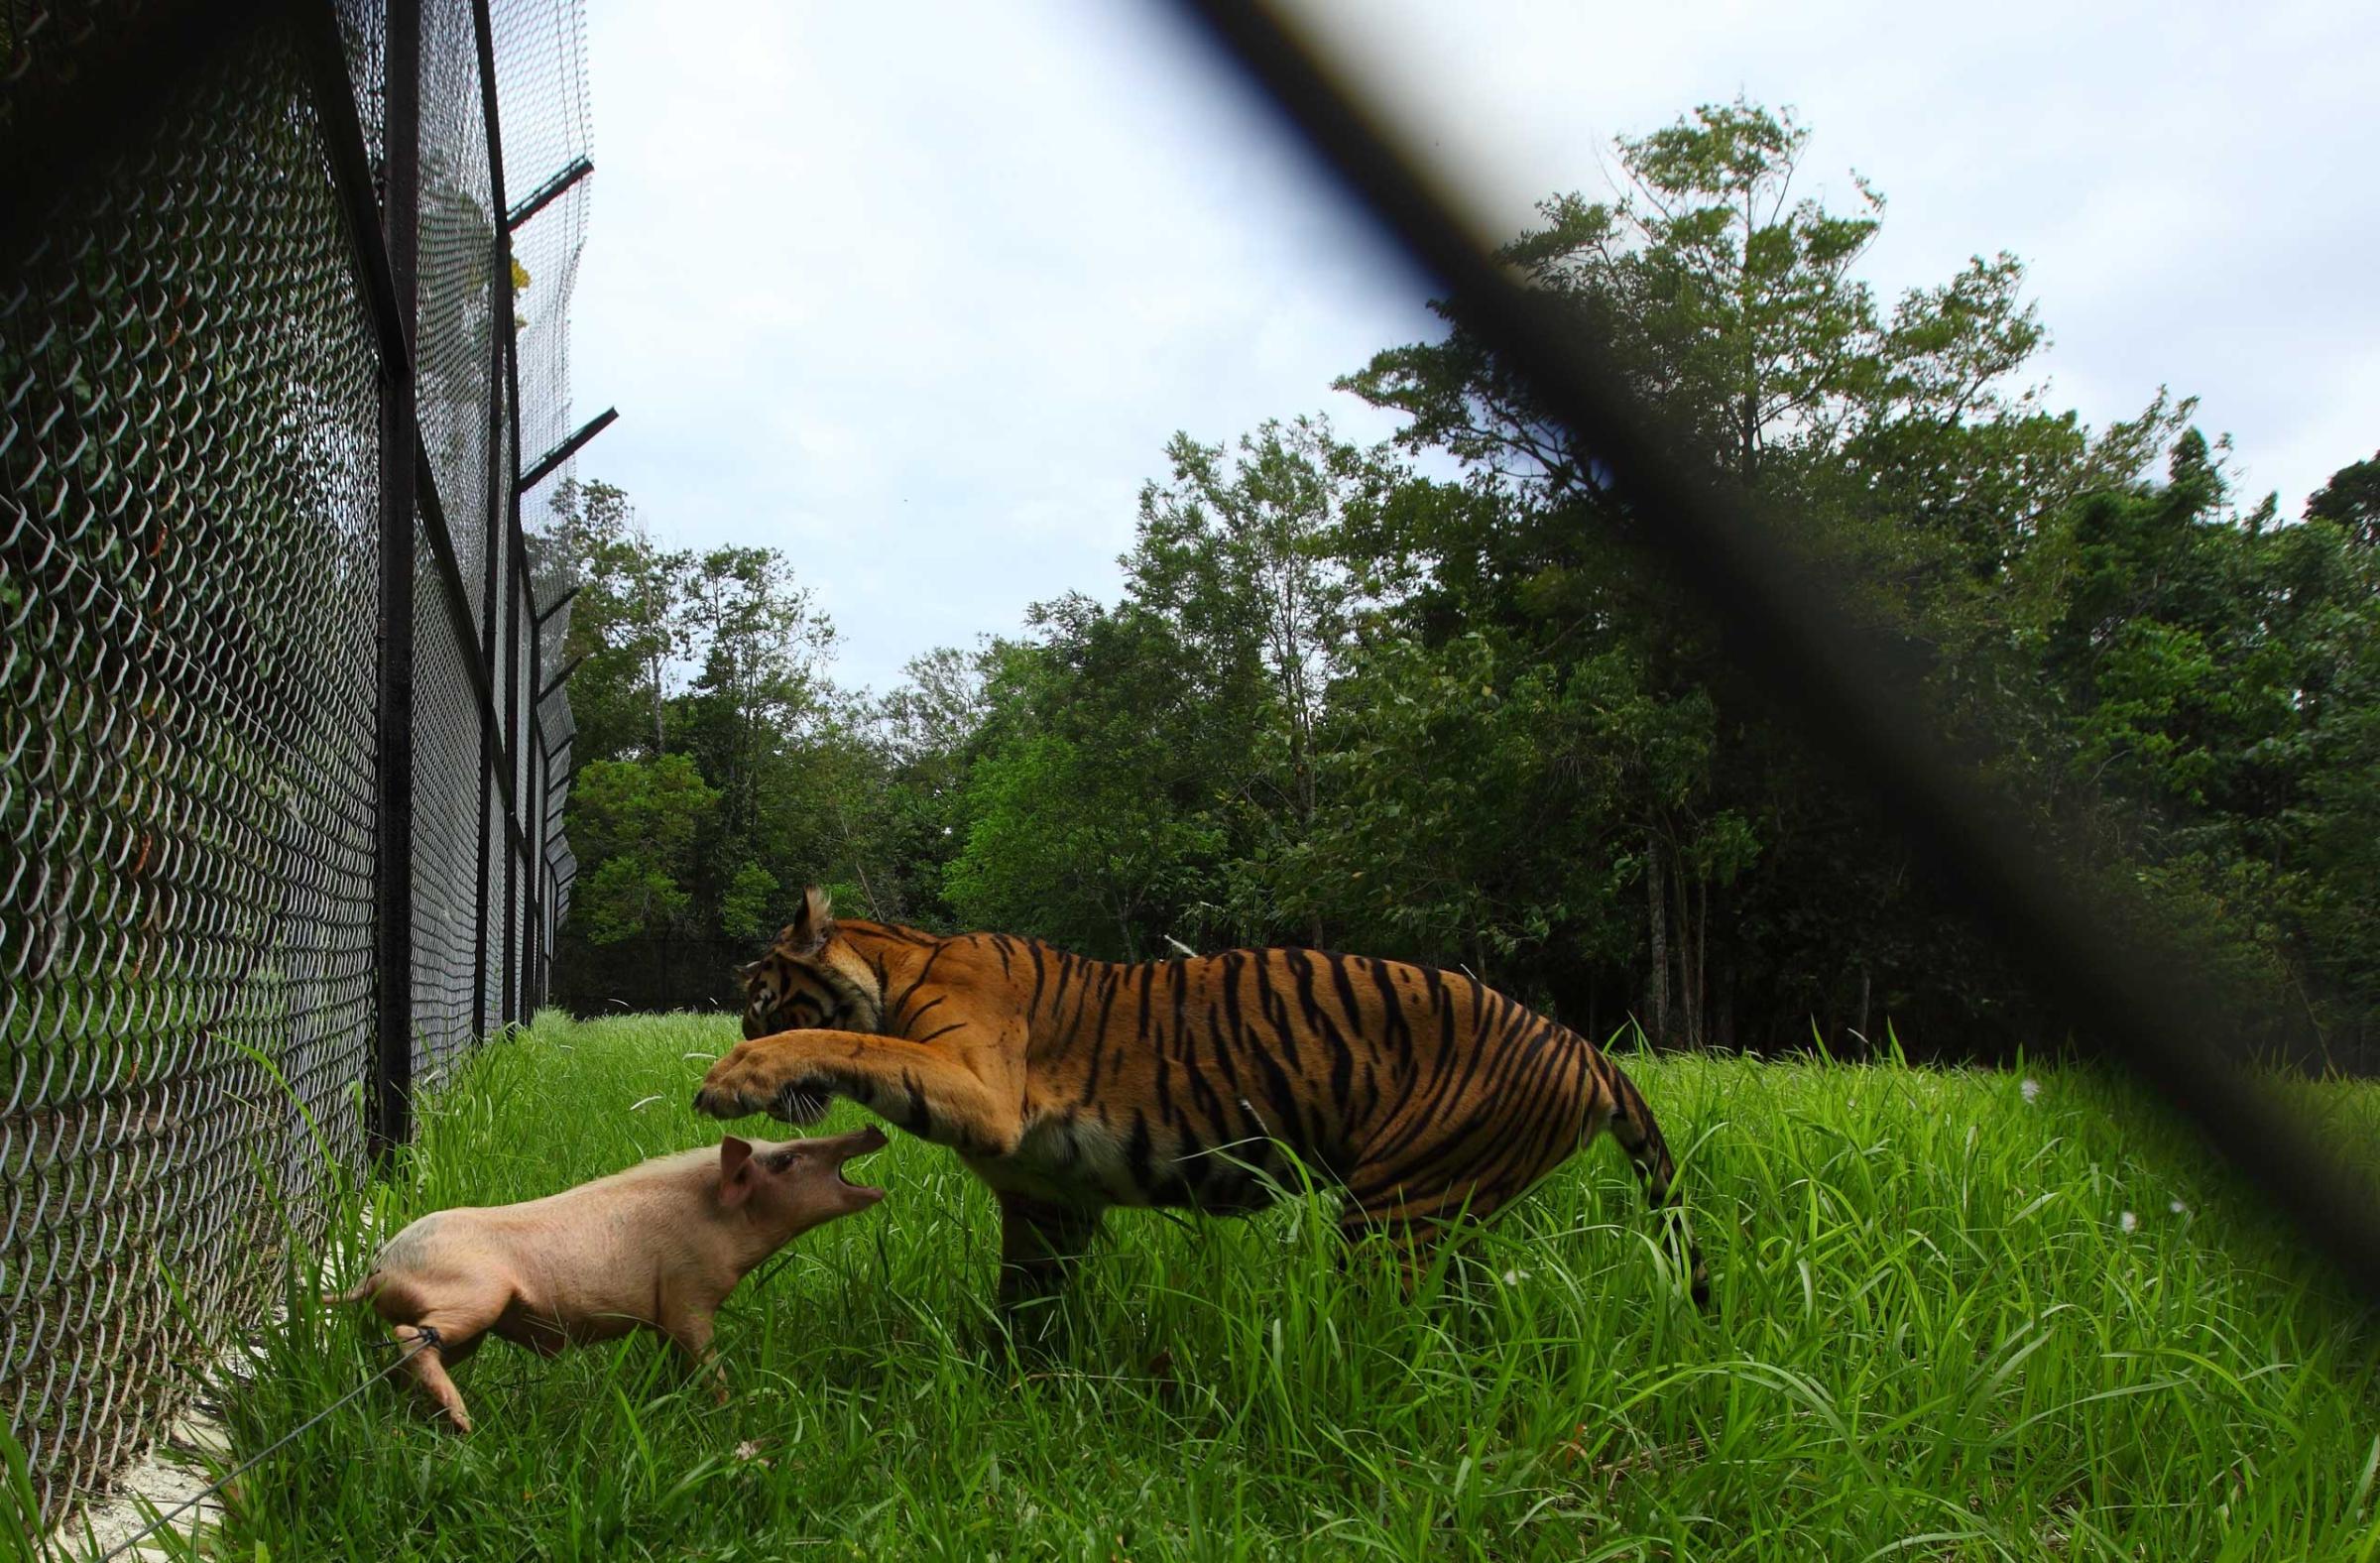 A Sumatran tiger plays with a pig before killing it at the Sumatra Tiger Rescue Centre compound